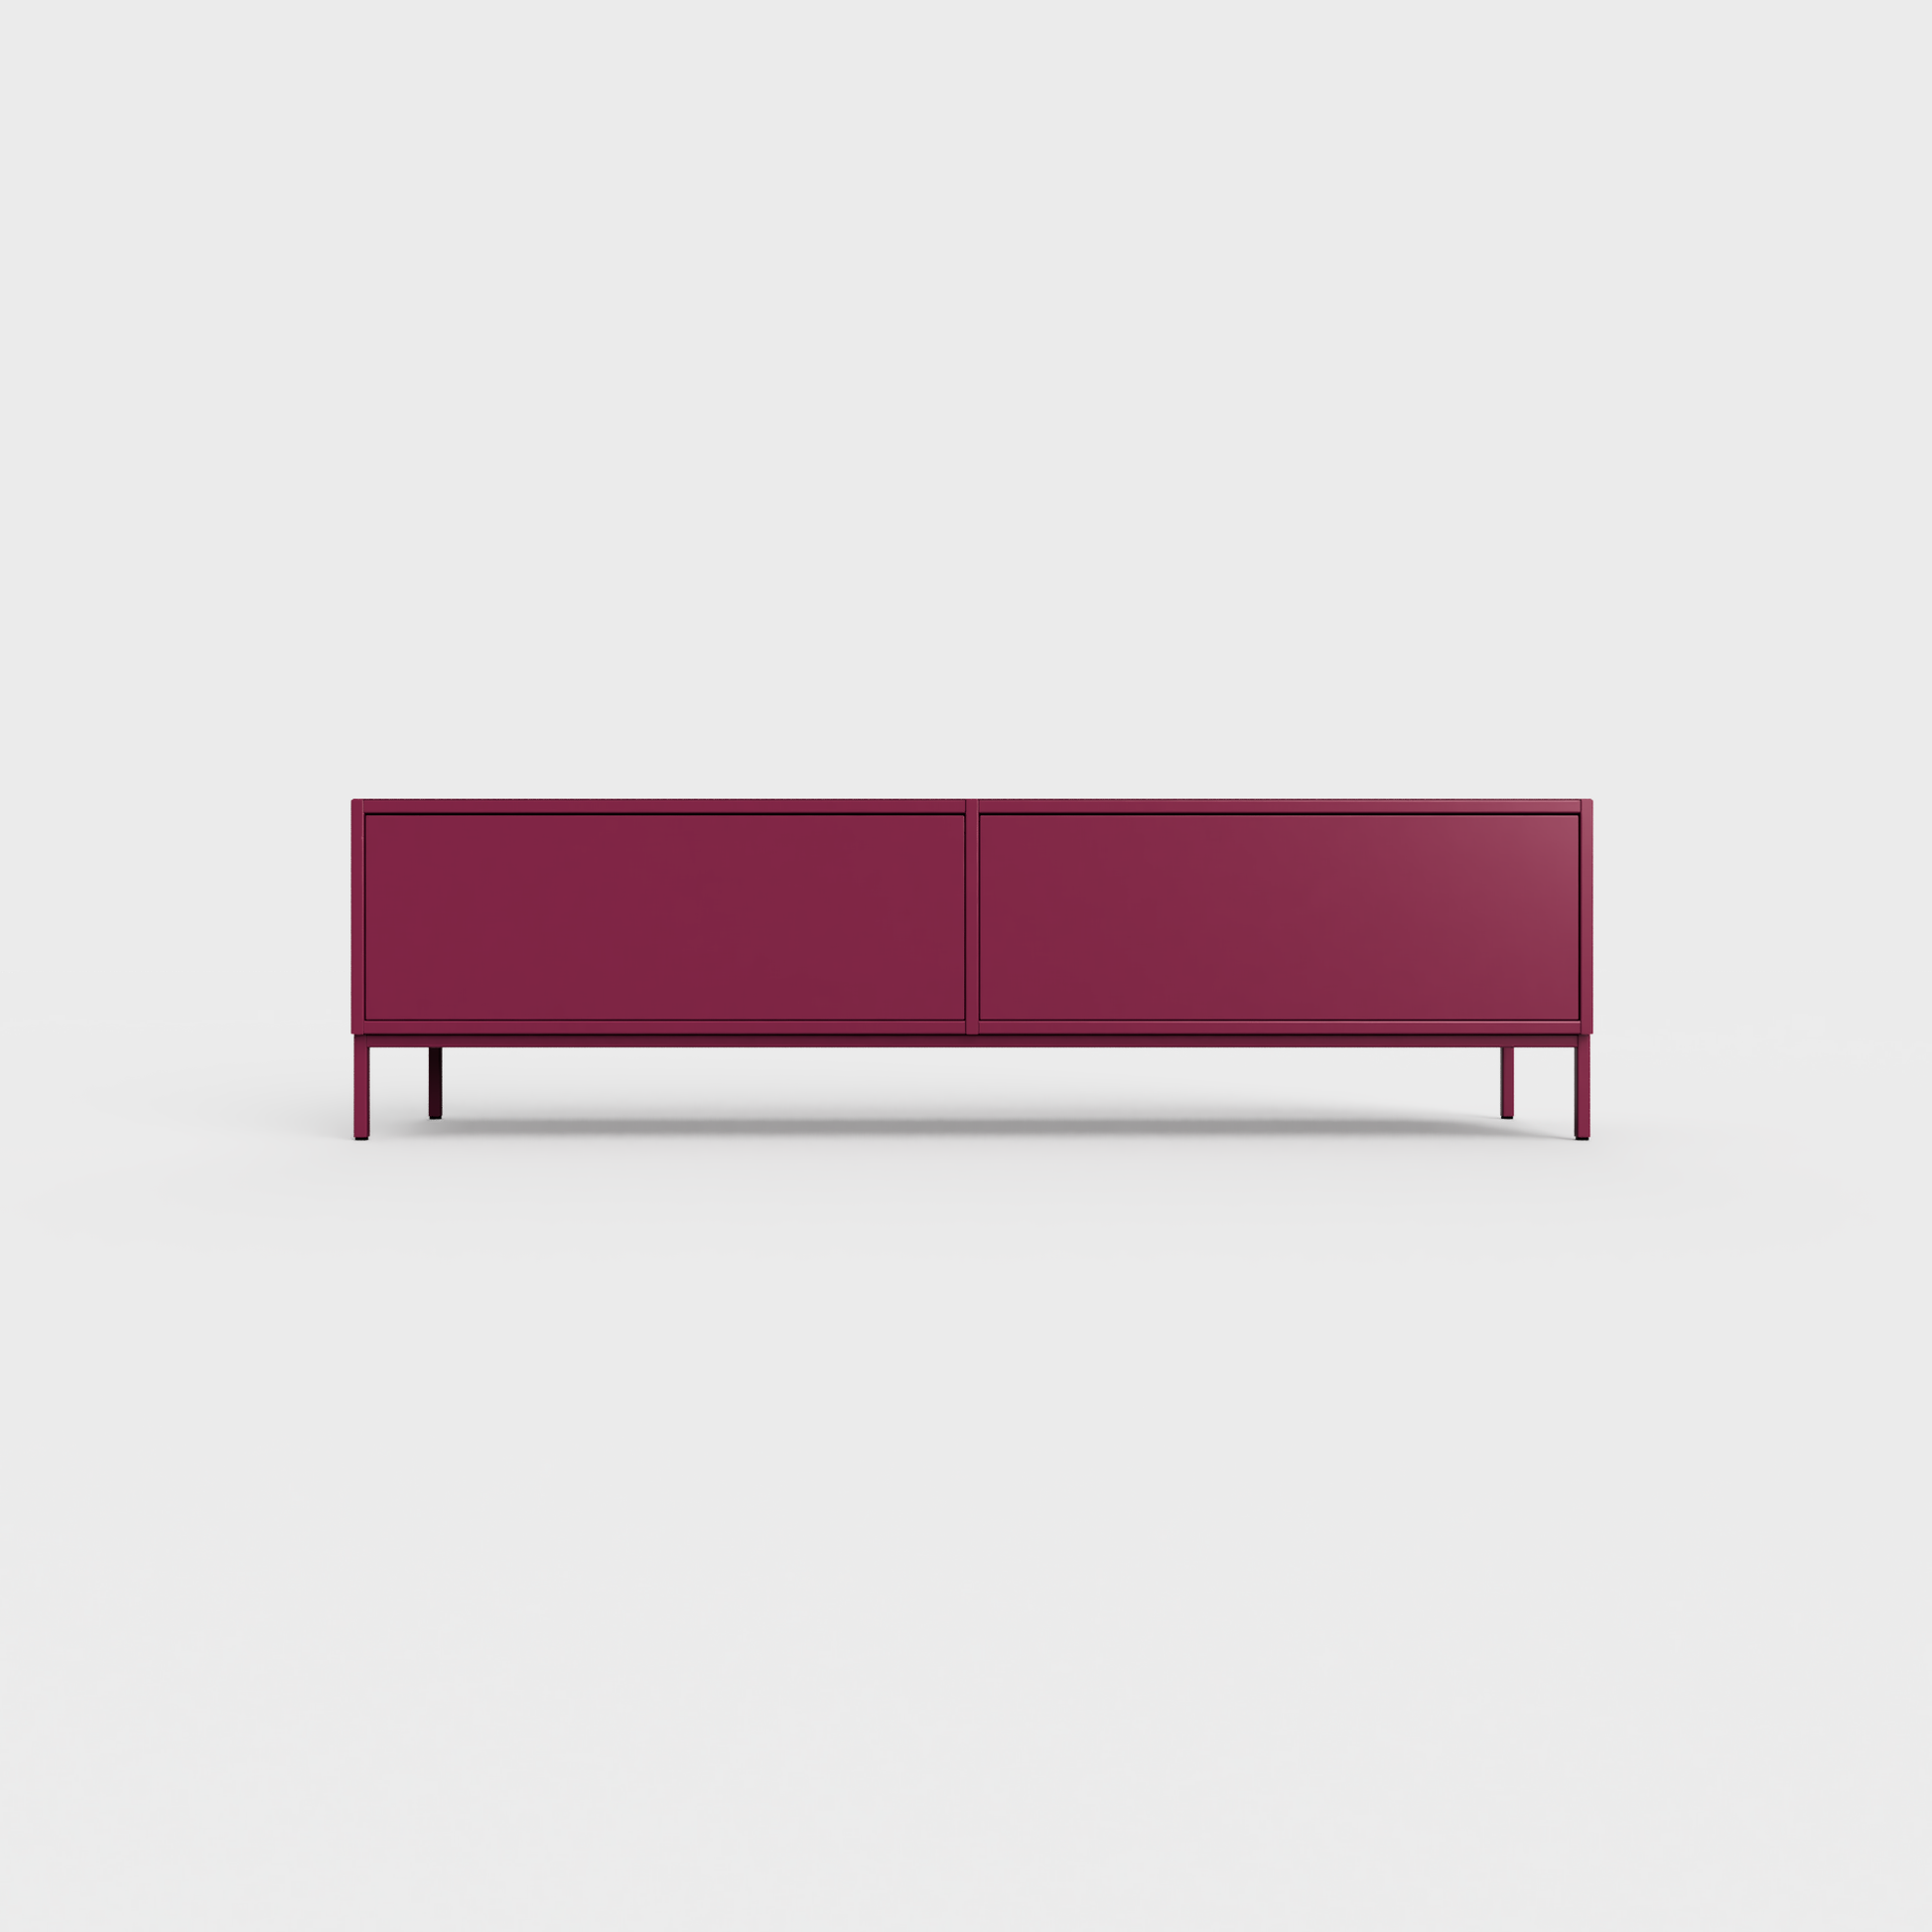 Prunus 01 Lowboard in Plum color, powder-coated steel, elegant and modern piece of furniture for your living room